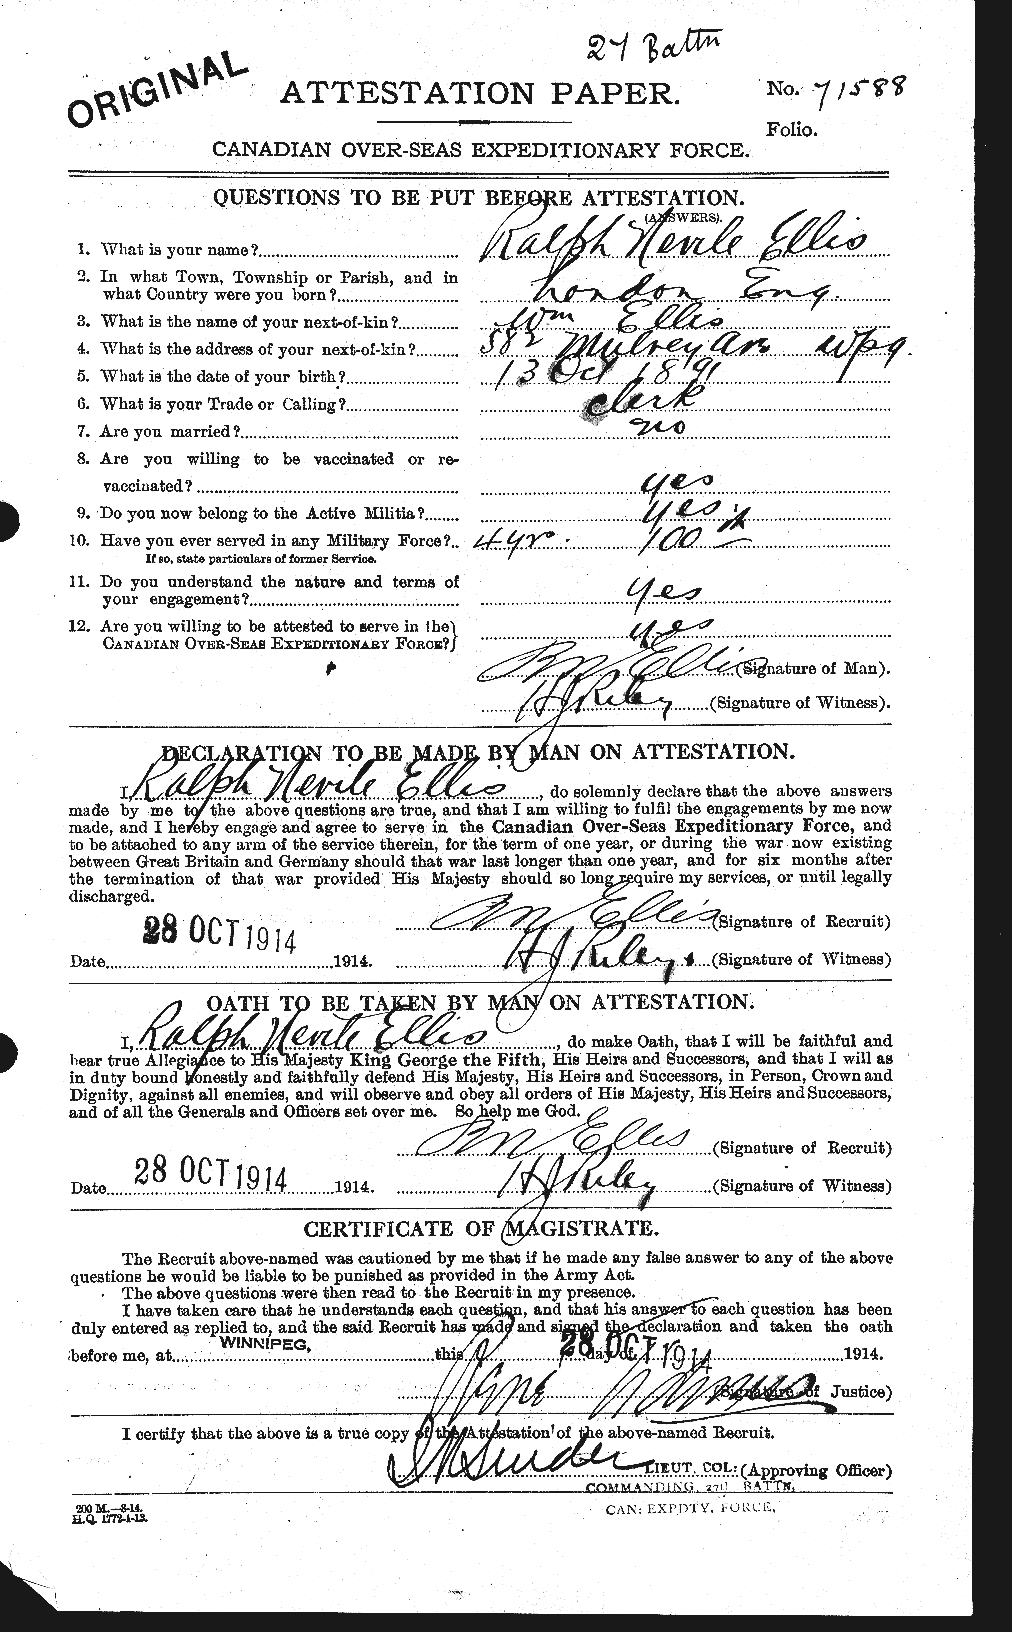 Personnel Records of the First World War - CEF 313559a